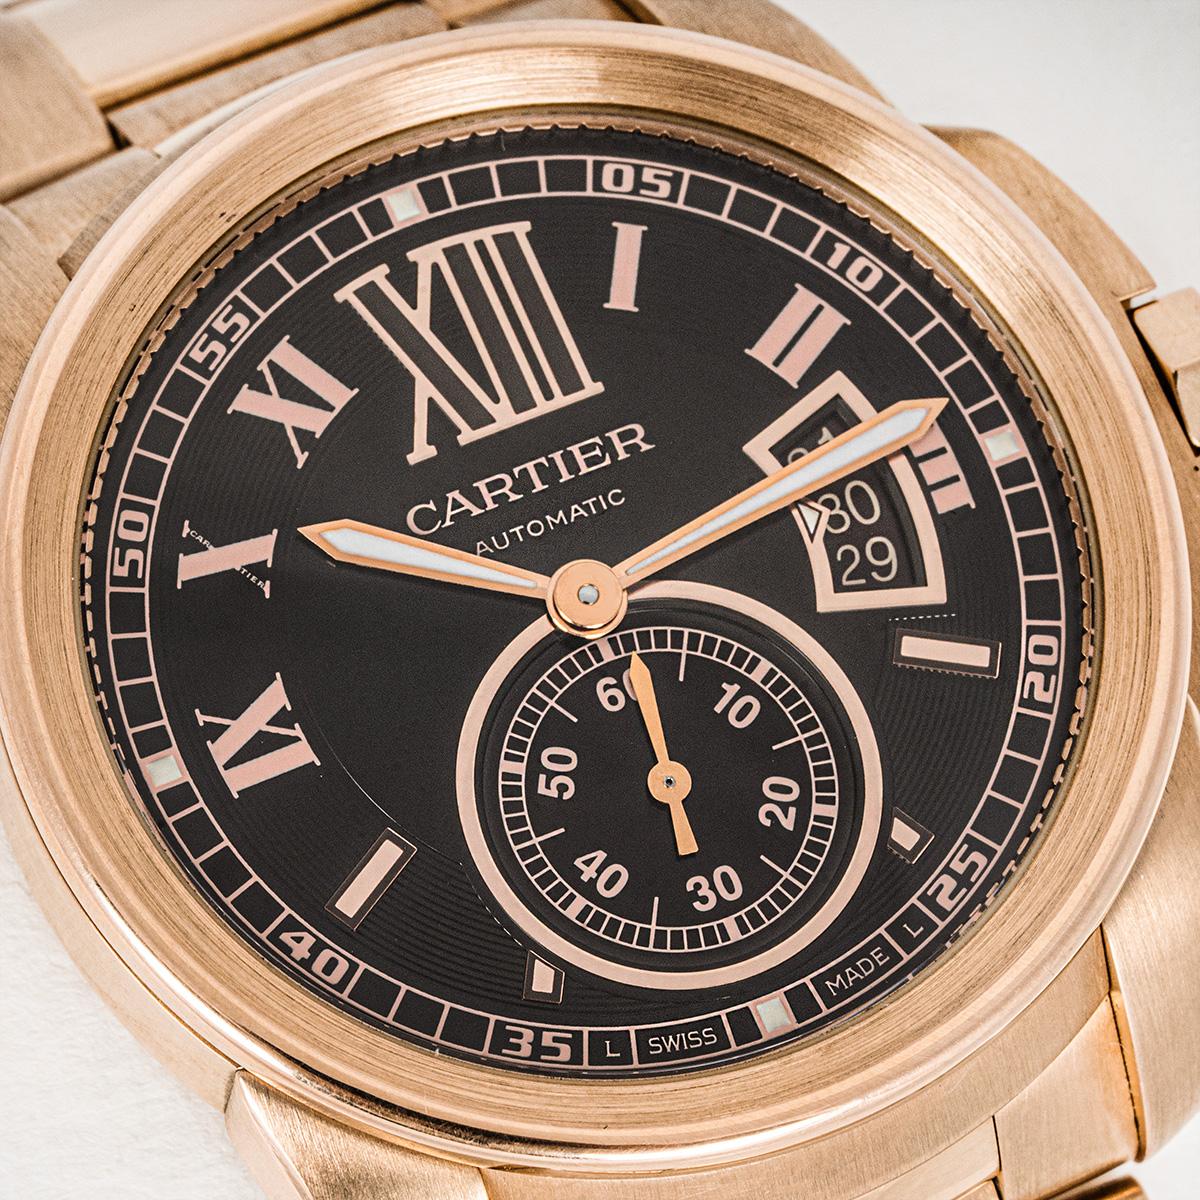 A 42mm rose gold Calibre De Cartier. Featuring a brown dial with roman numerals, a date aperture, a small seconds display, a rose gold bezel and a crown set with a faceted synthetic spinel.

Fitted with a sapphire crystal glass and a self-winding